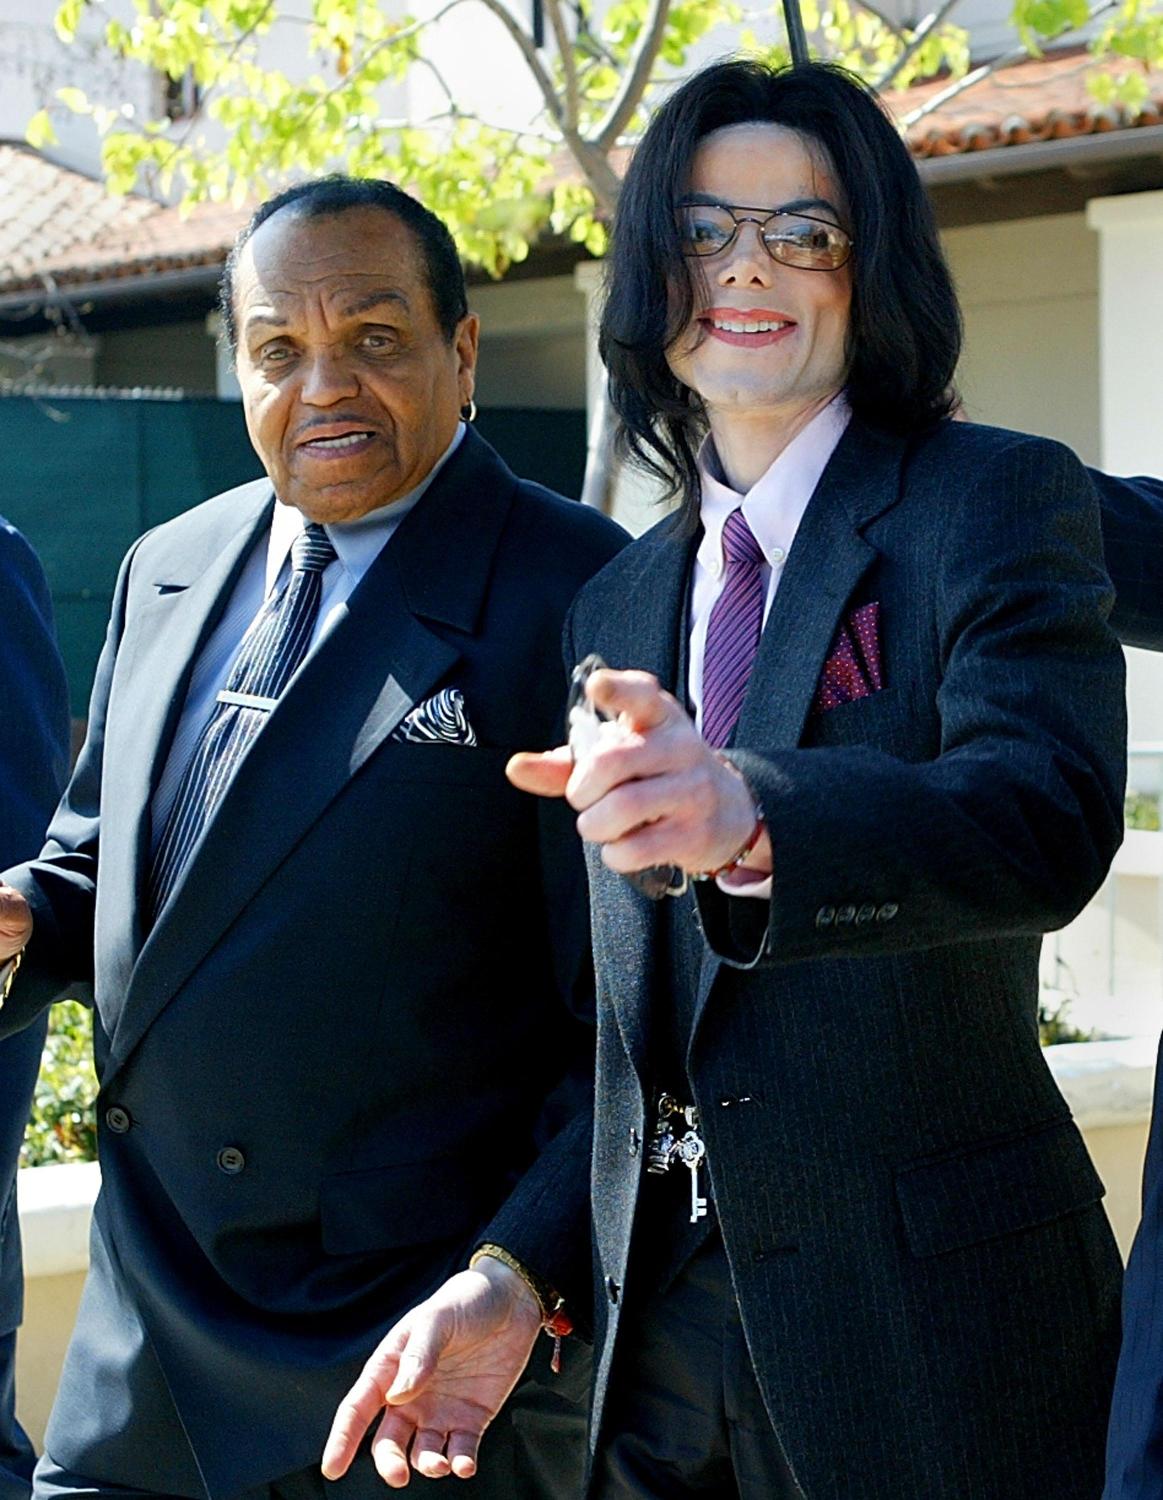 Michael Jackson's Father "chemically Castrated" Him When He Was A Child, "i Am Scared Of My Father To This Day"